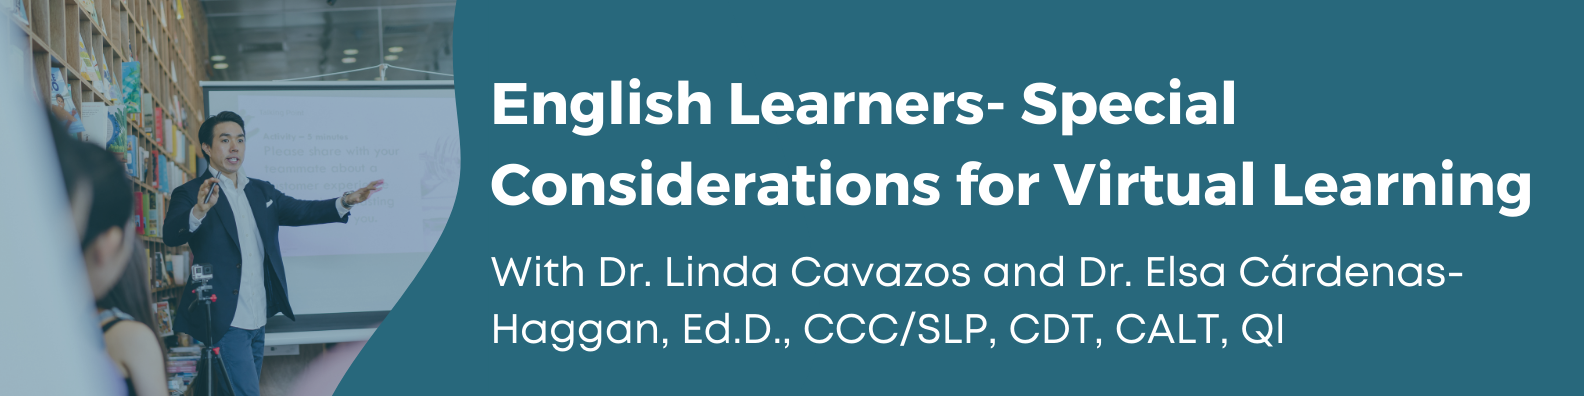 English Learners- Special Considerations for Virtual Learning with Dr. Linda Cavazos and Dr. Elsa Cardenas-Hagan, Ed.D., CCC/SLP, CDT, CALT, QI